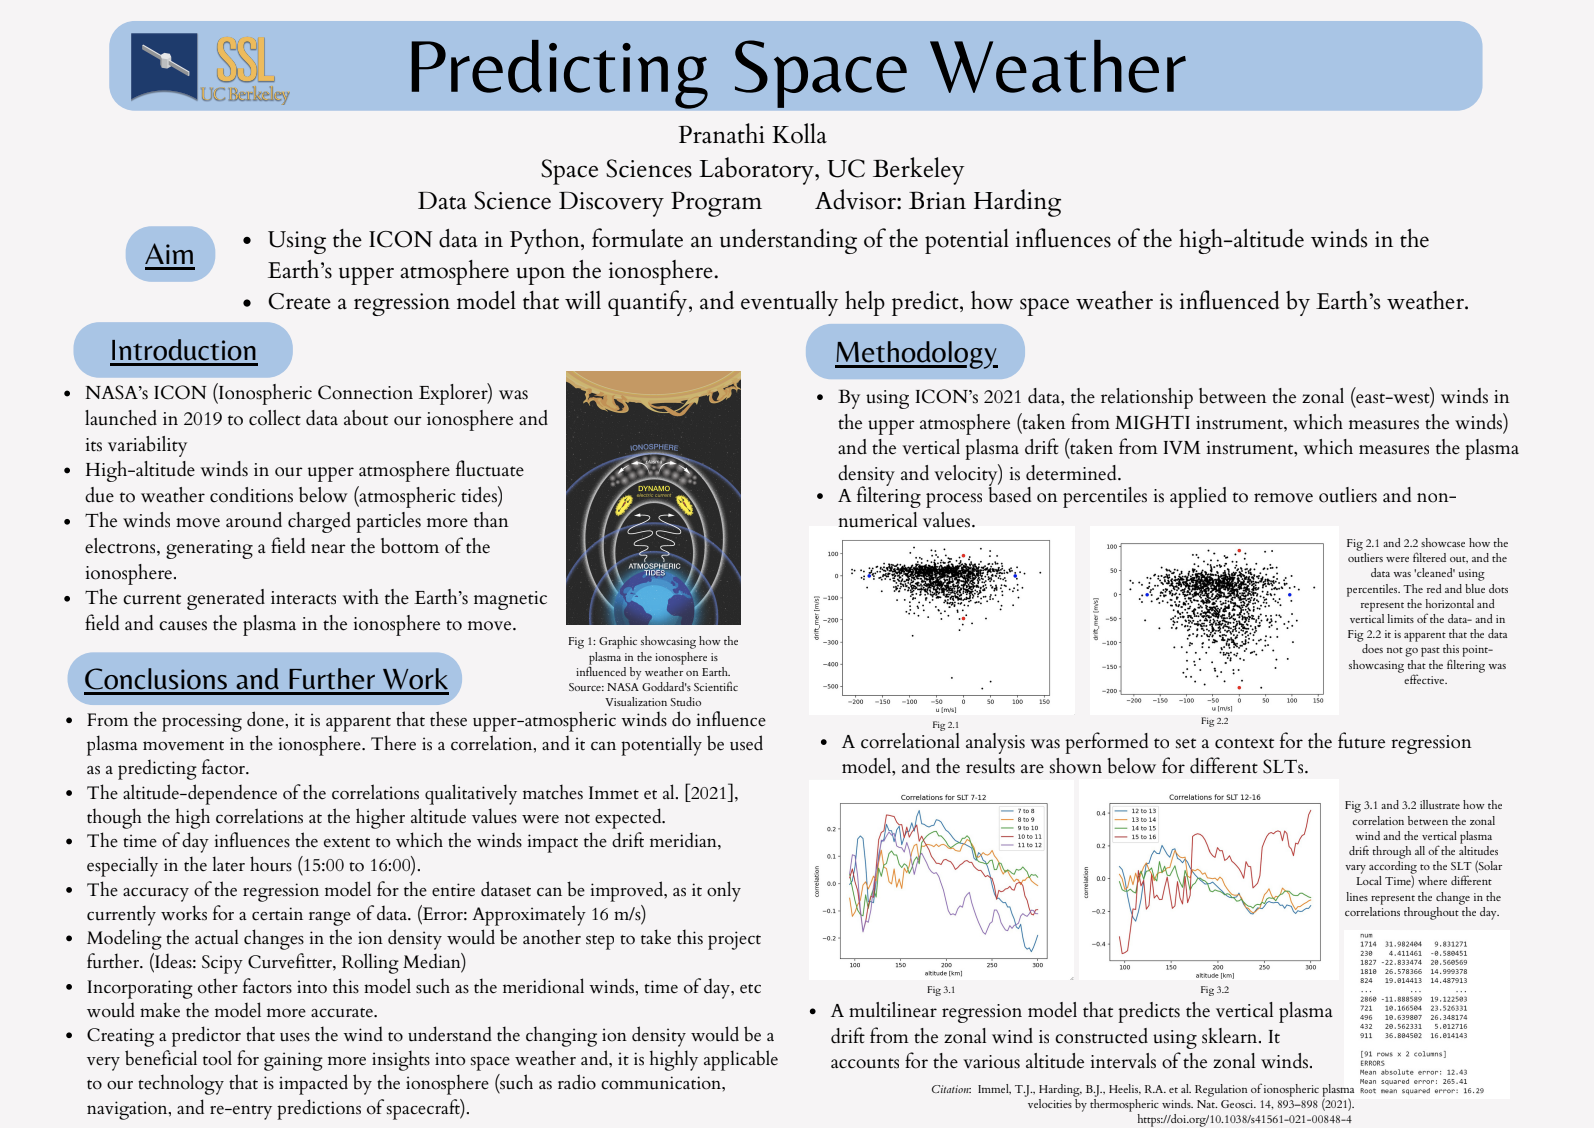 Predicting Space Weather - Fall 2022 Discovery Project